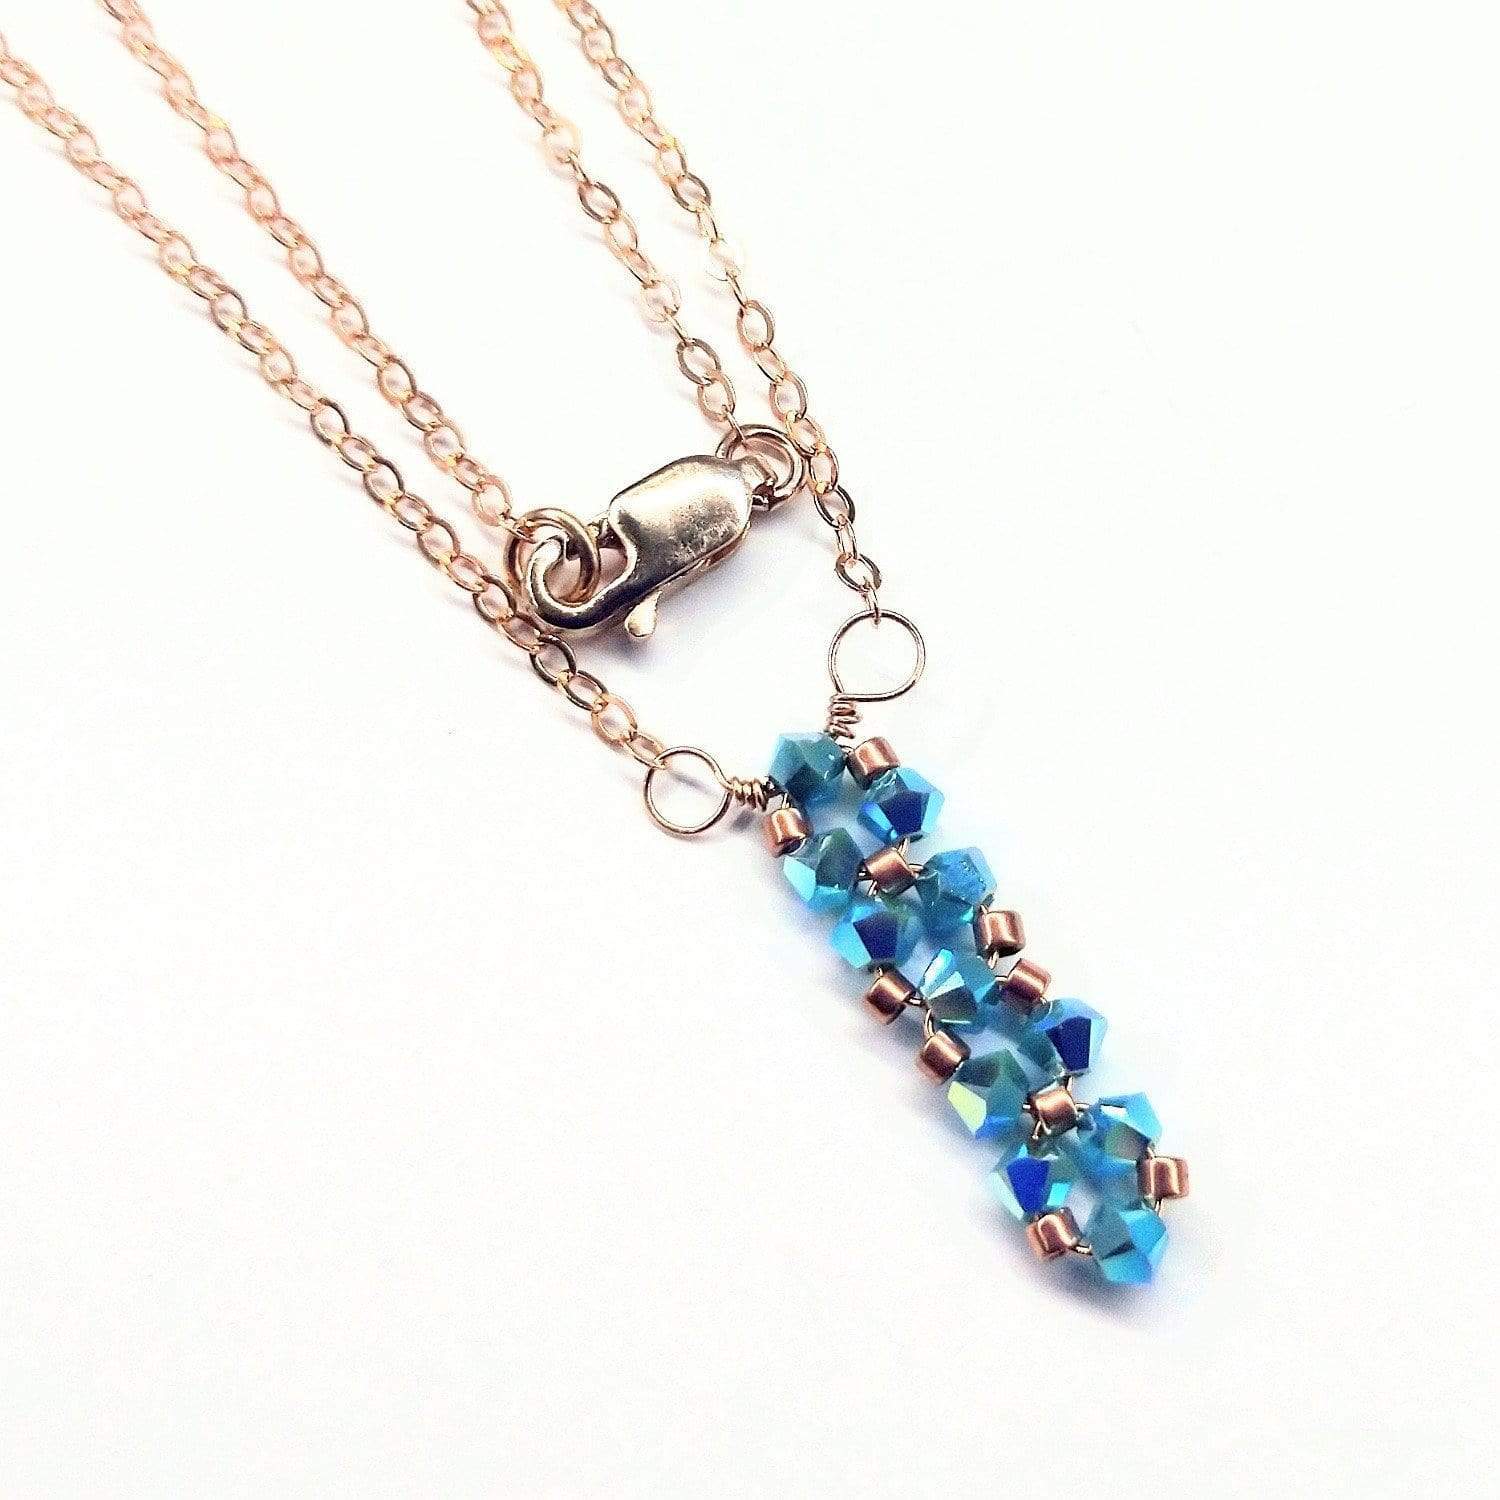 Sparkly Turquoise Crystal Bar Necklace - Handcrafted with 14kt Rose Gold-Filled Chain - Necklaces - Bijou Her -  -  - 